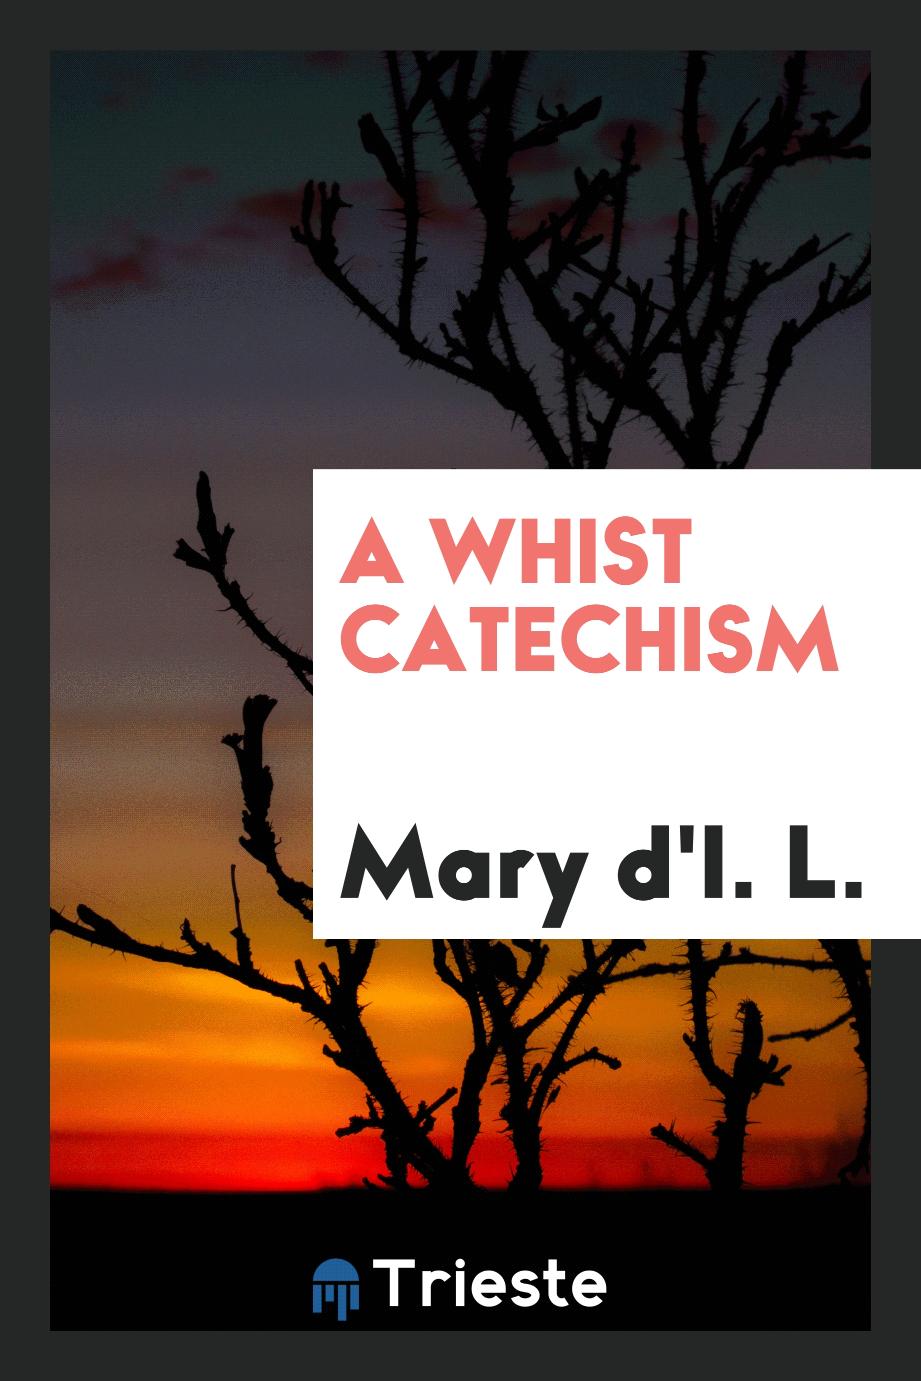 A Whist Catechism